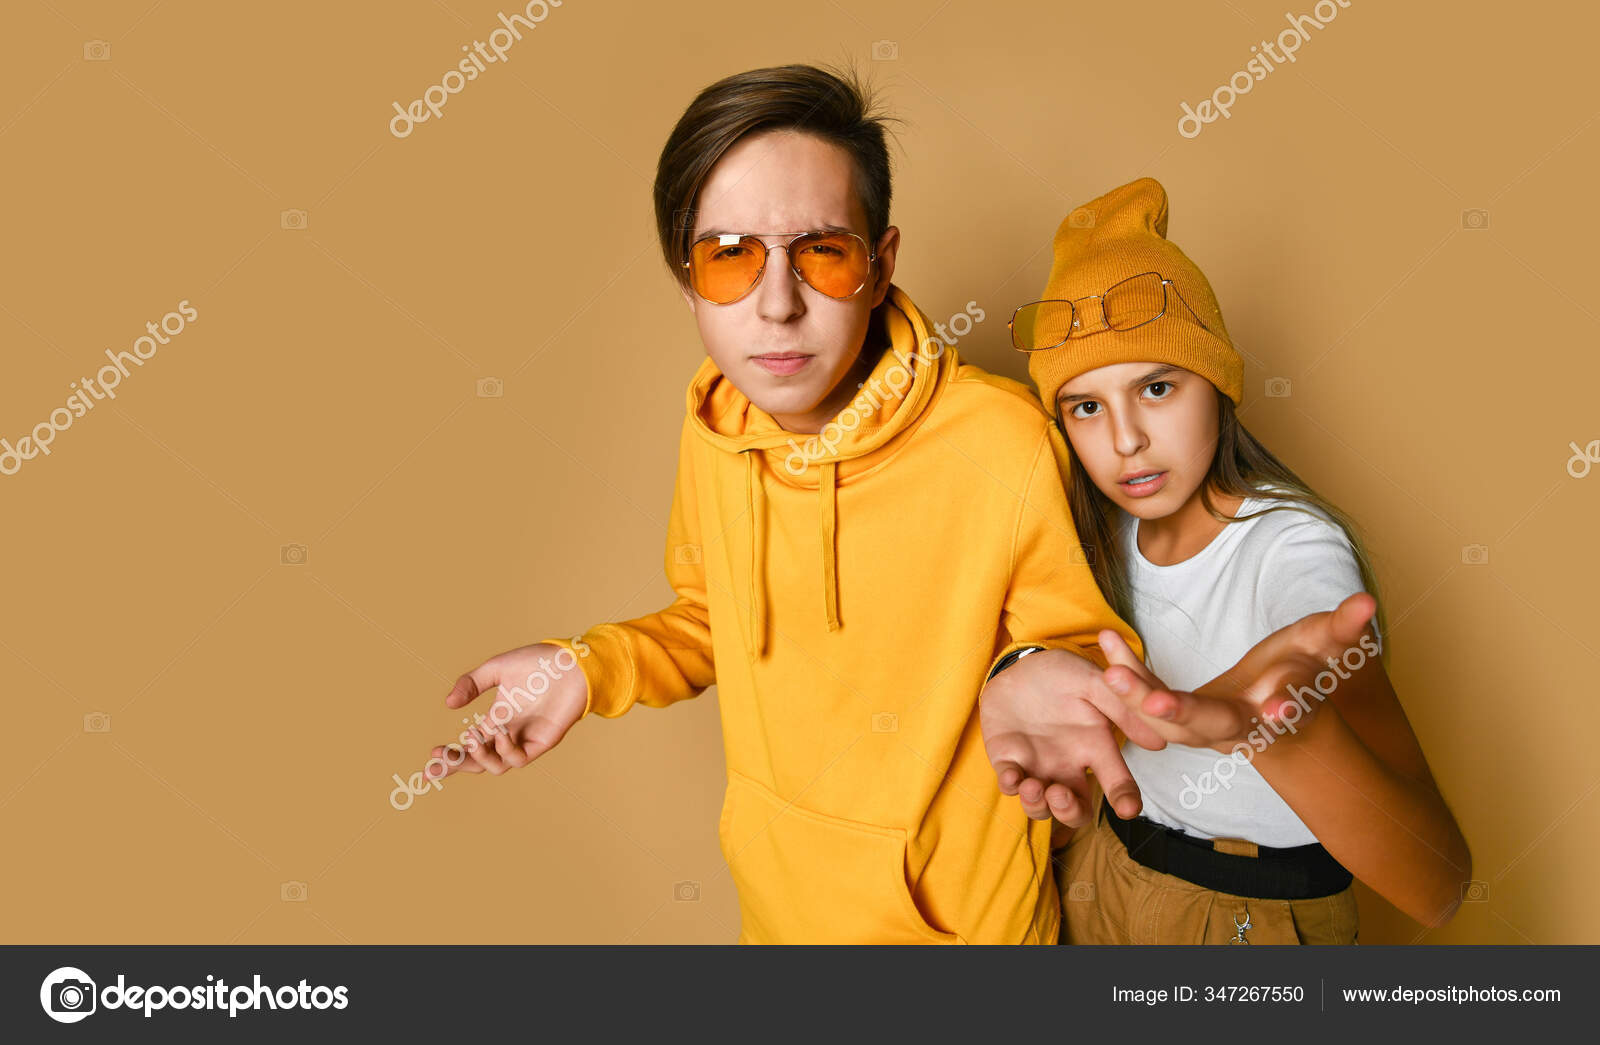 Young teens boy and girl in comfortable clothing, hats and